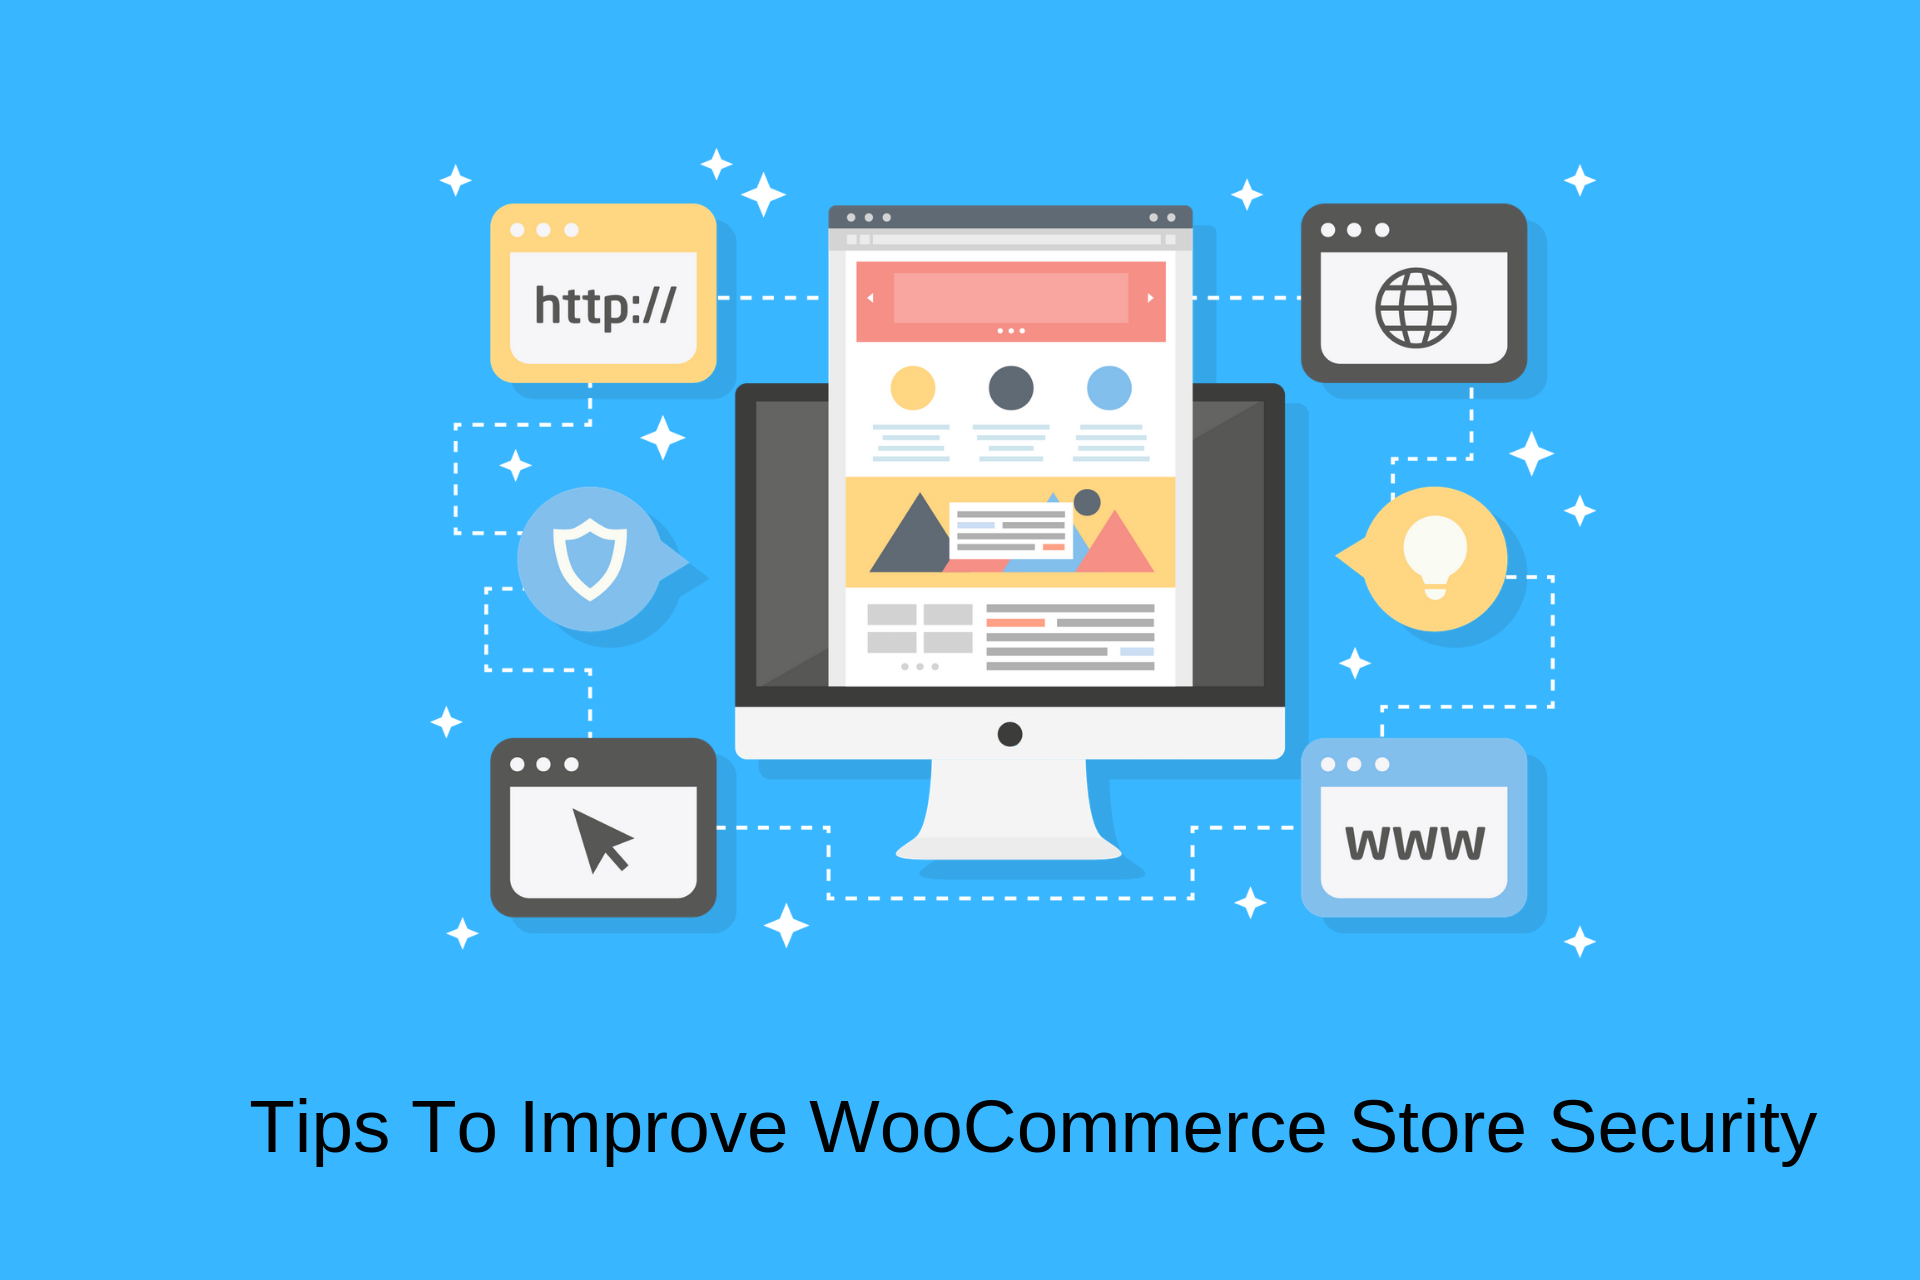 How to Safeguard Your WooCommerce Store